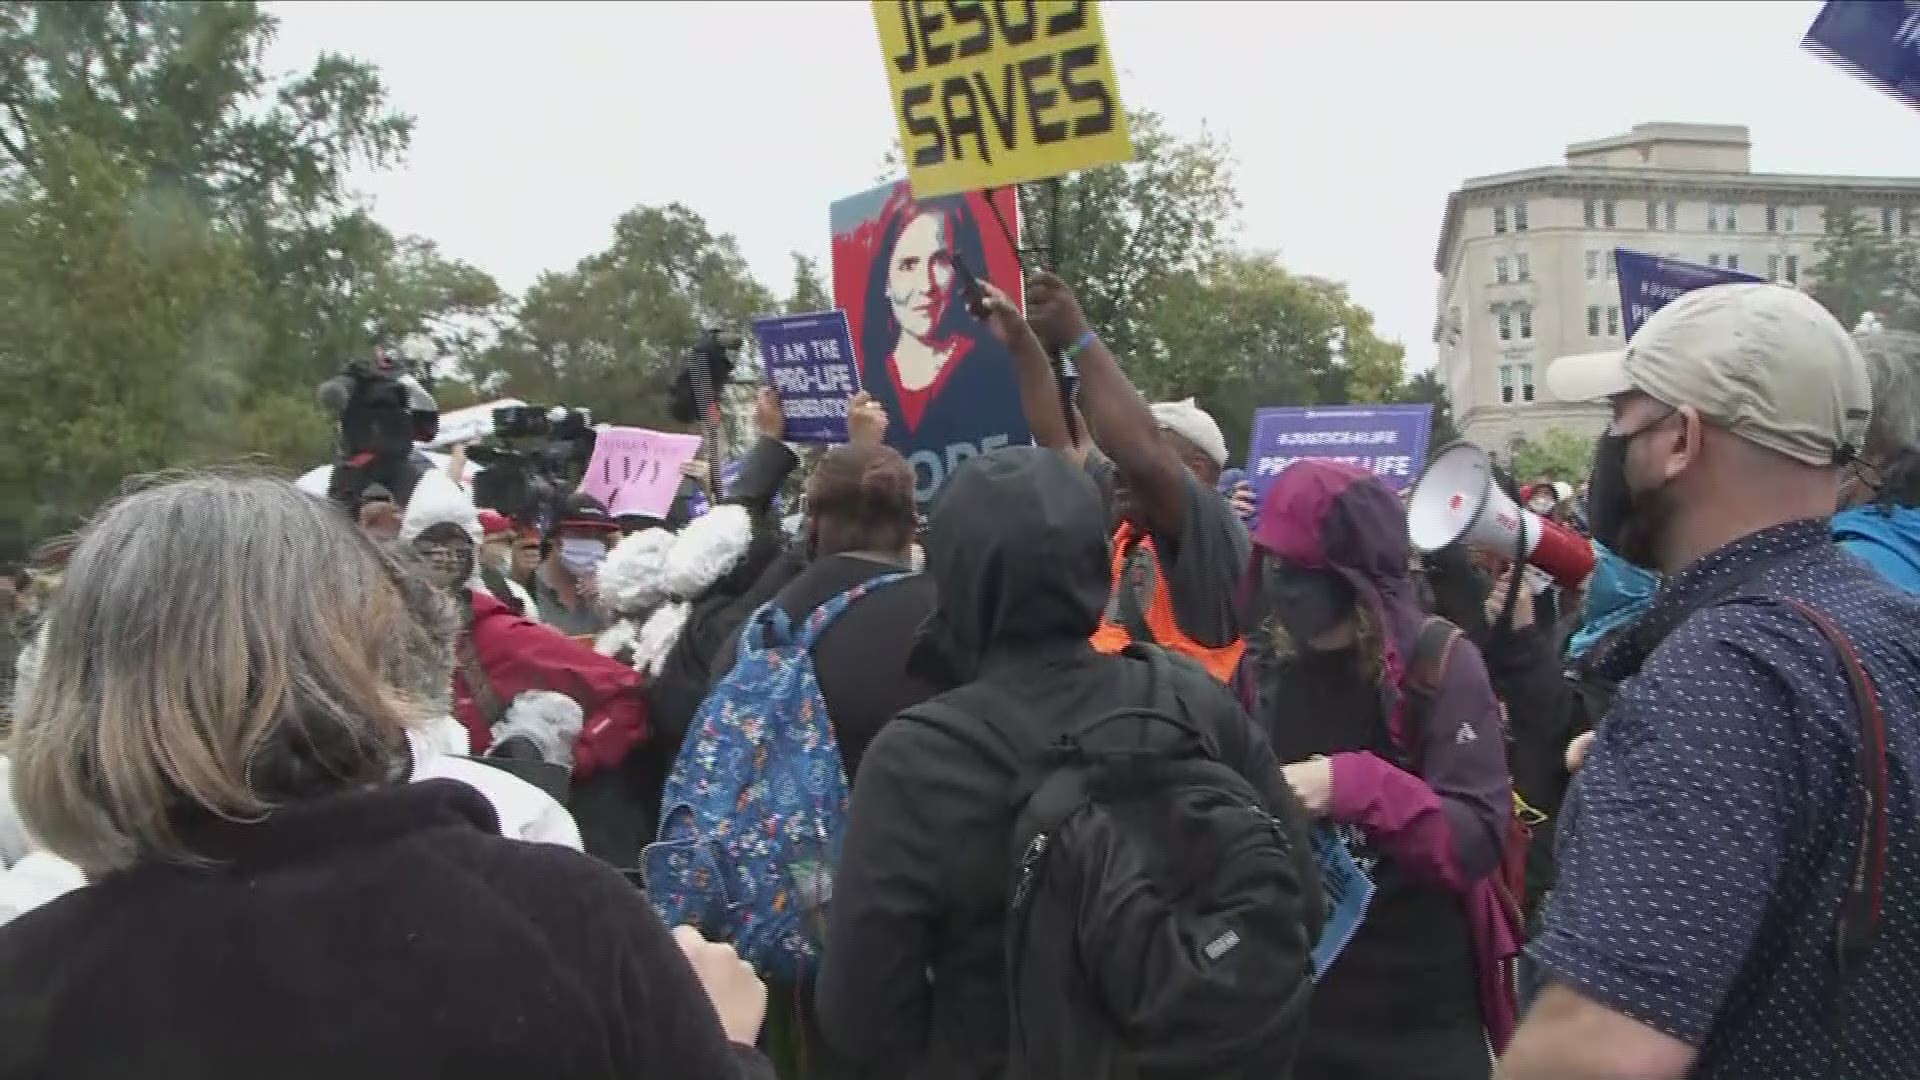 Demonstrators for and against the confirmation of Supreme Court nominee Judge Amy Coney Barrett were outside the supreme court during her first hearing on Monday.